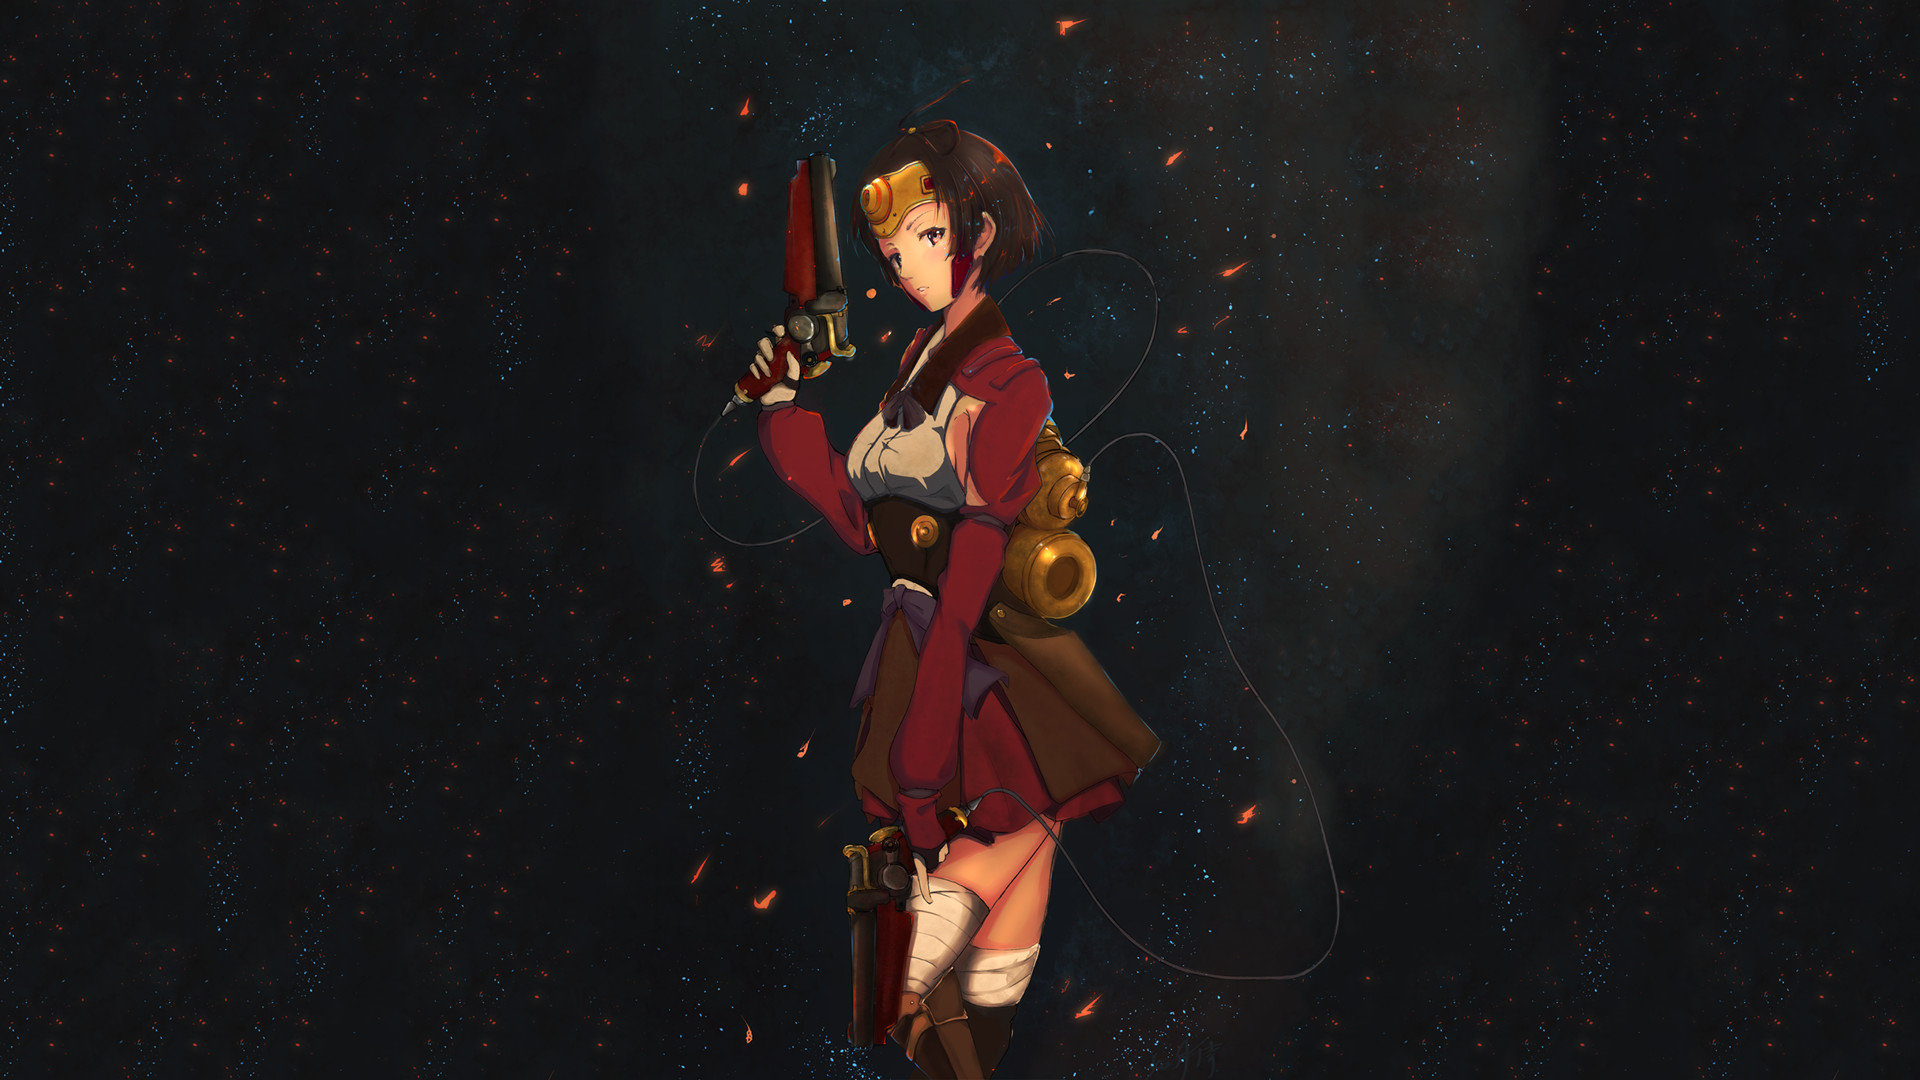 Best Kabaneri Of The Iron Fortress background ID:116884 for High Resolution full hd computer